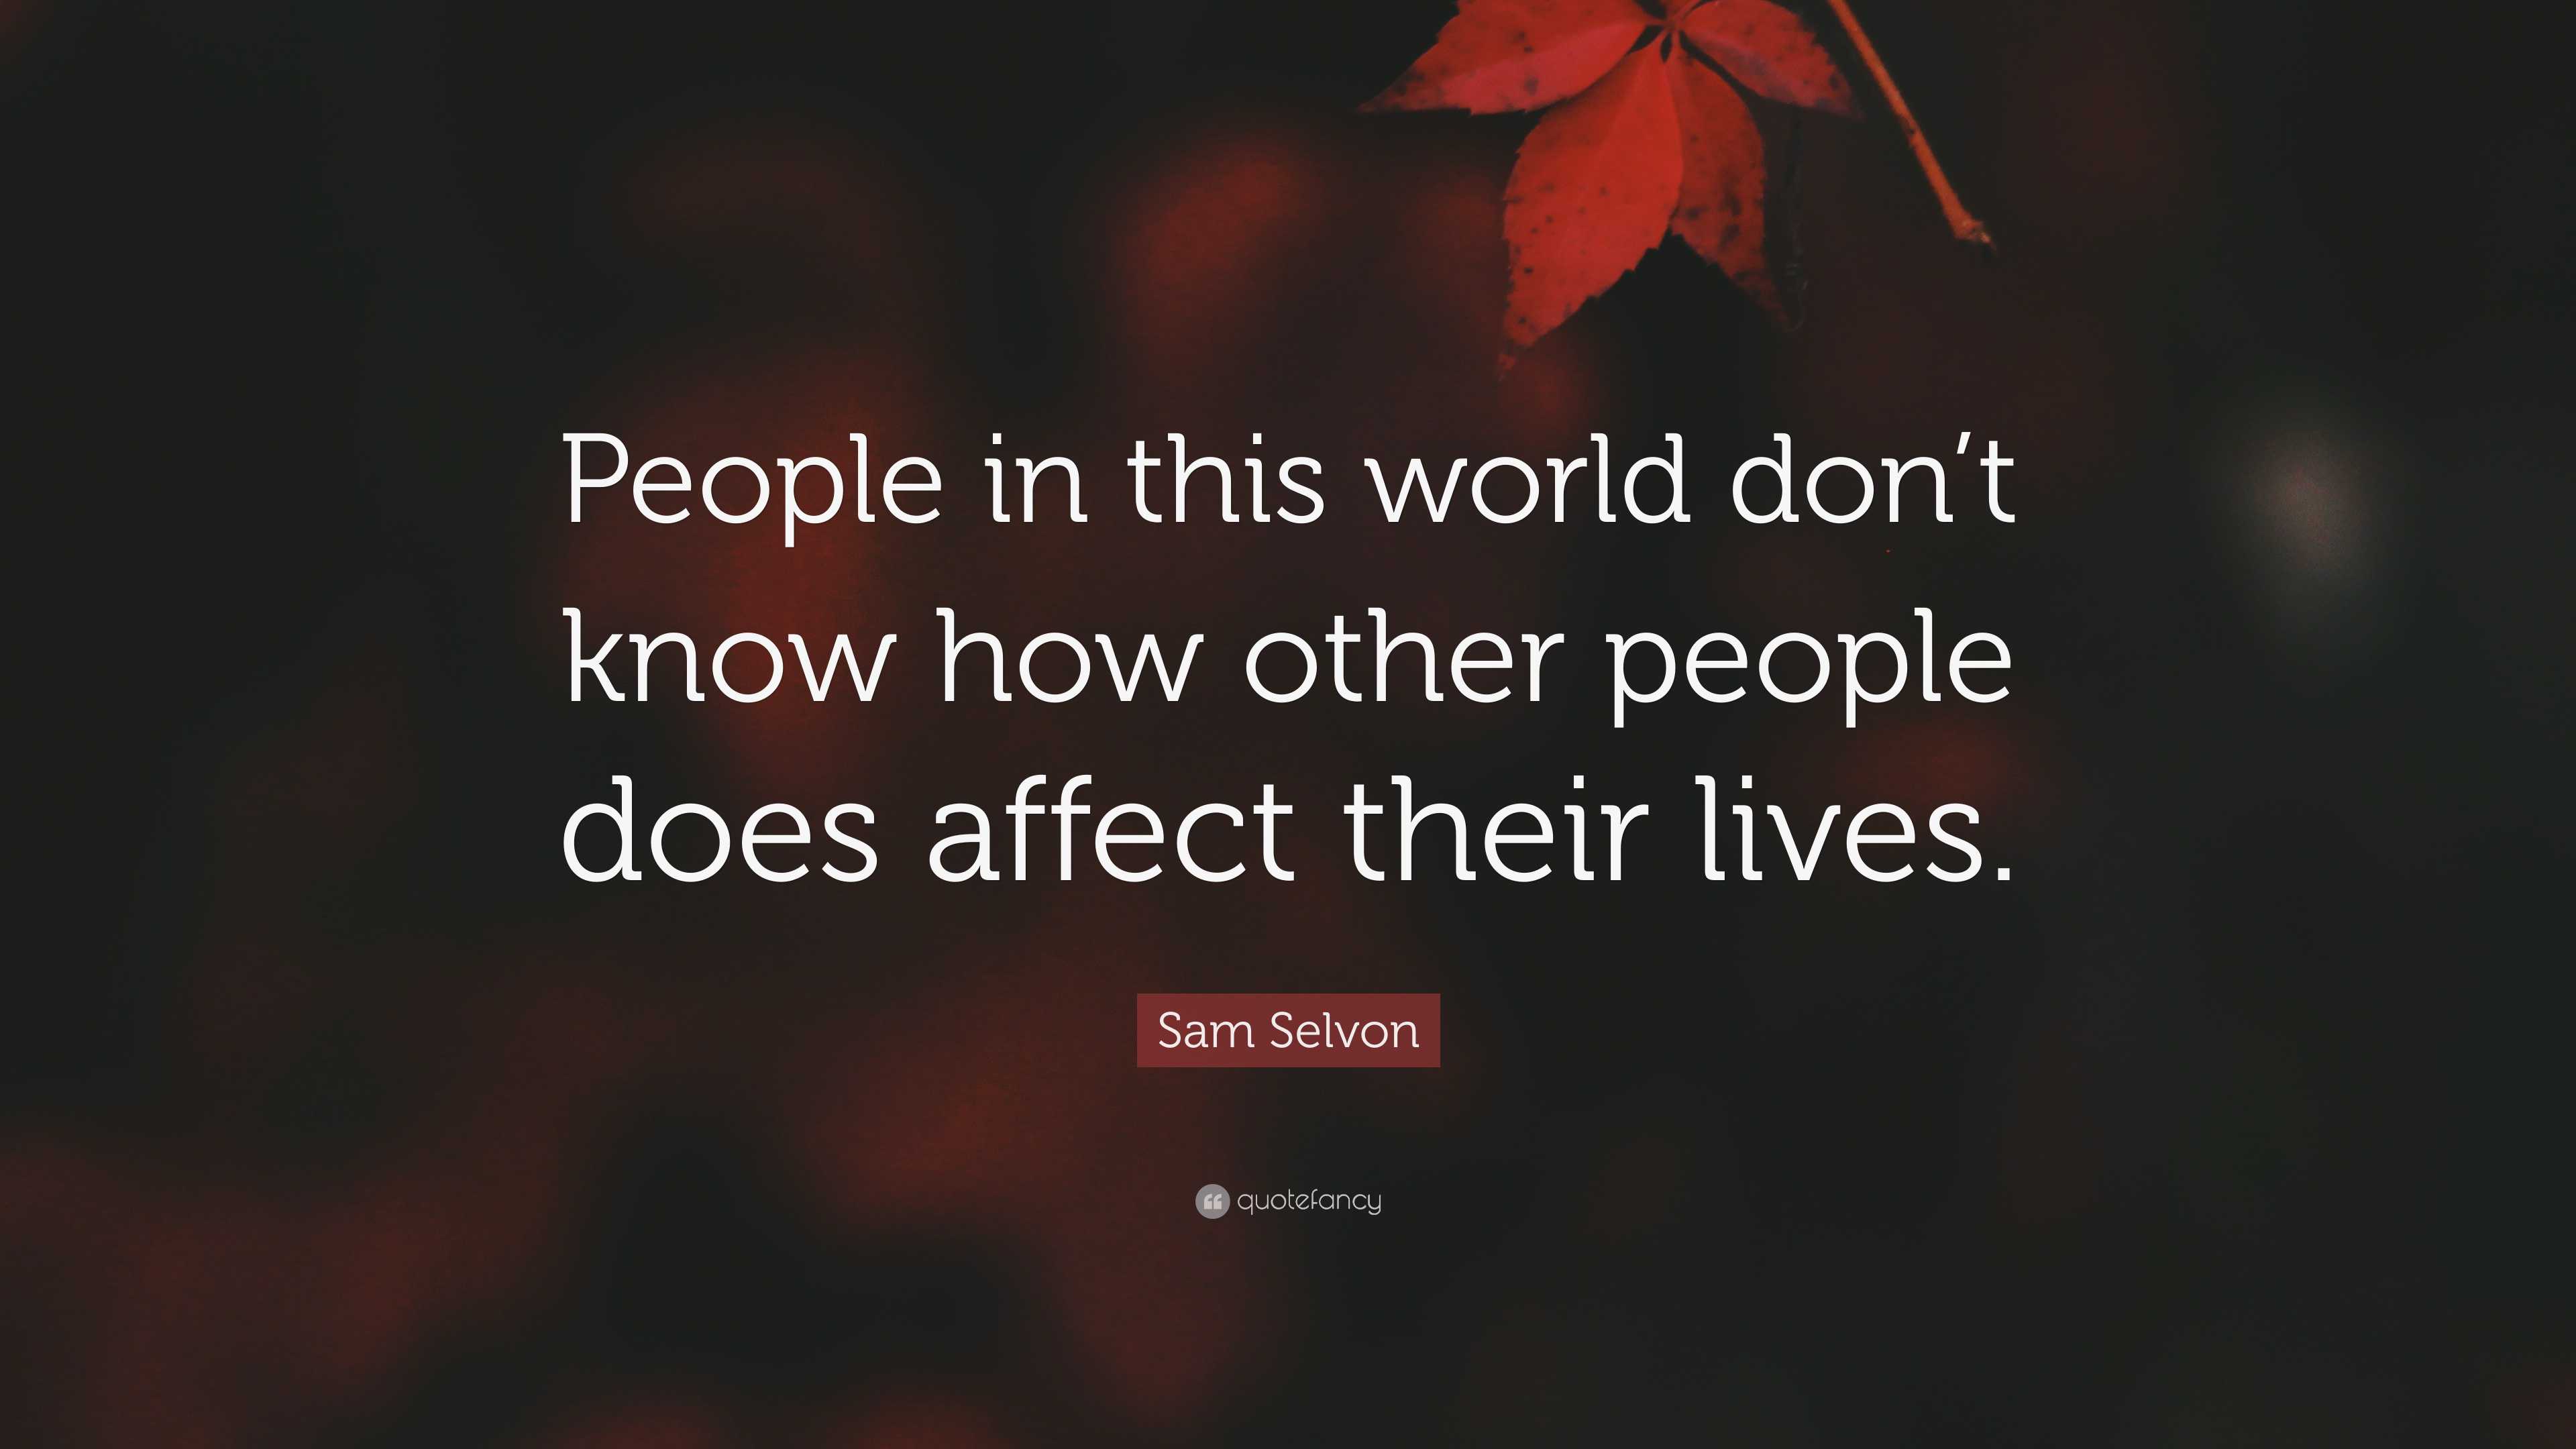 Sam Selvon Quote “people In This World Dont Know How Other People Does Affect Their Lives” 4361